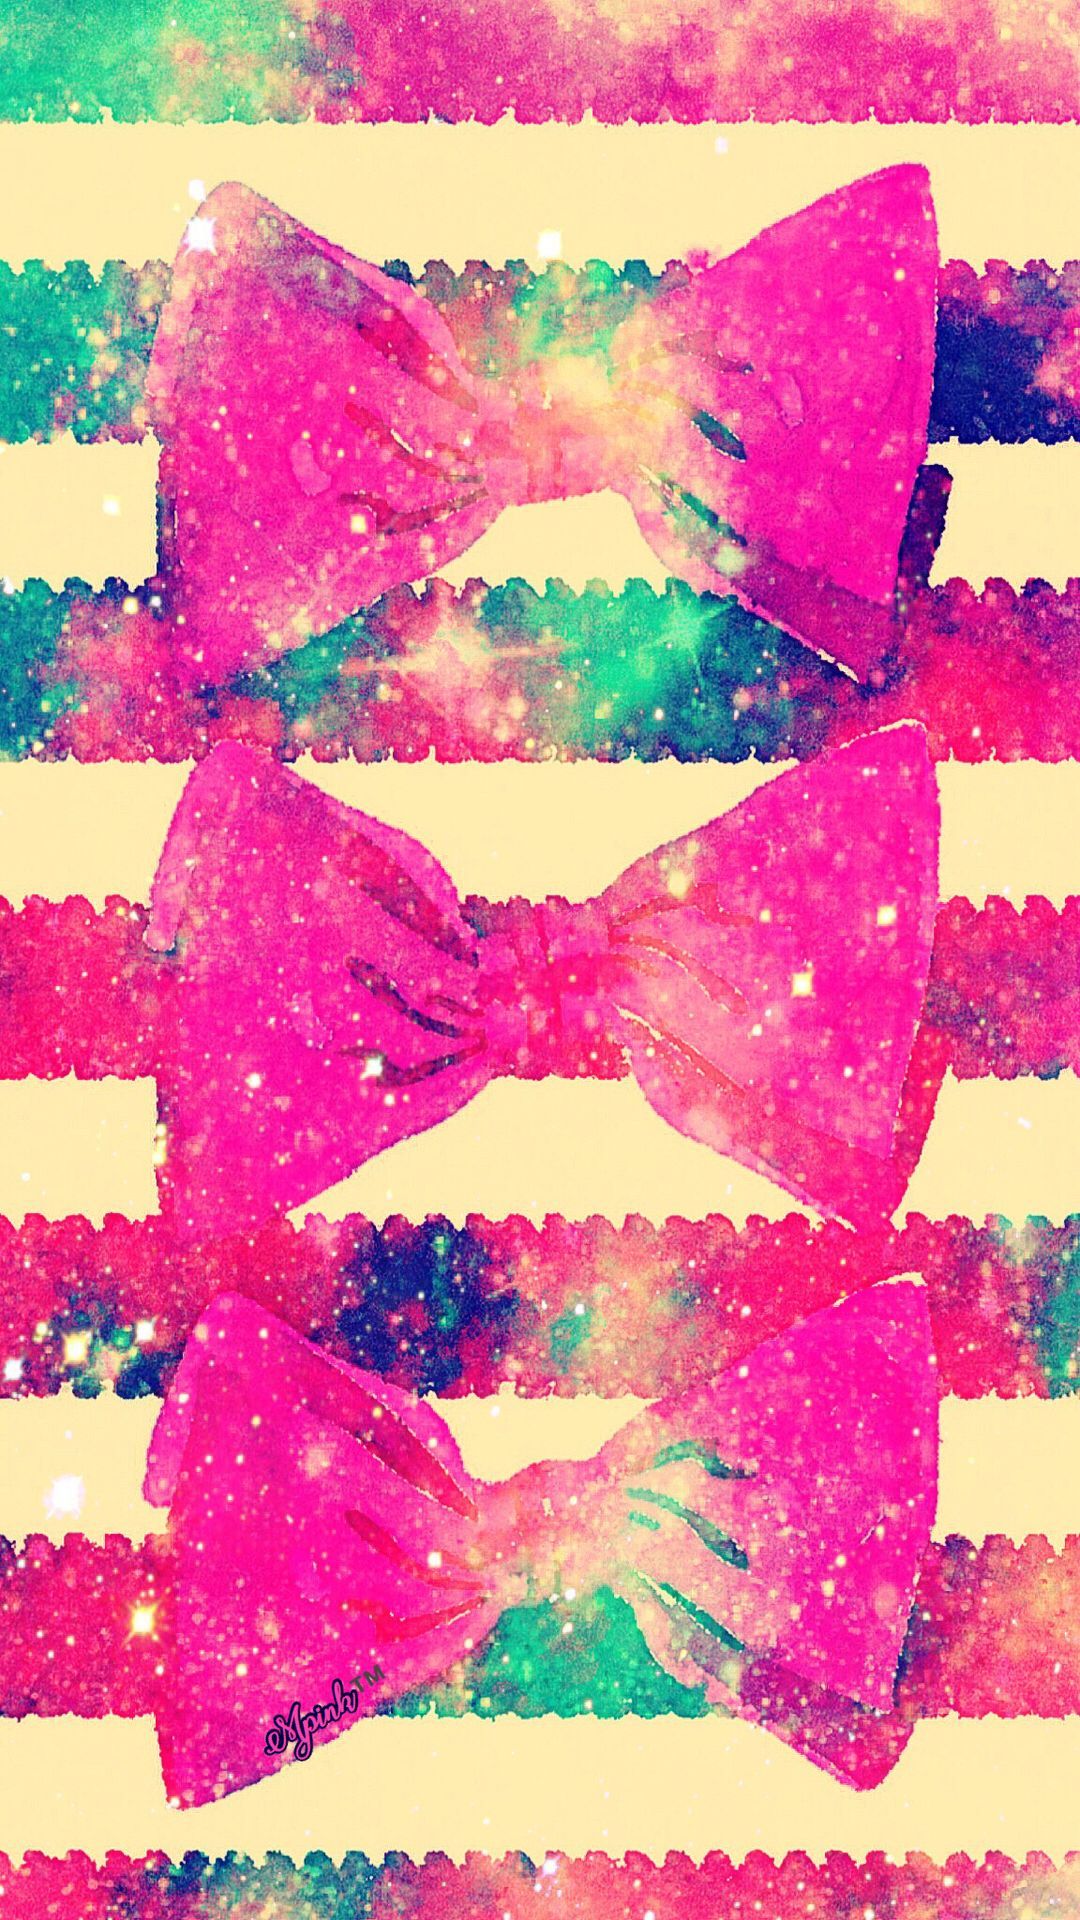 Cute Pink Vintage Bows Galaxy Wallpaper #androidwallpaper